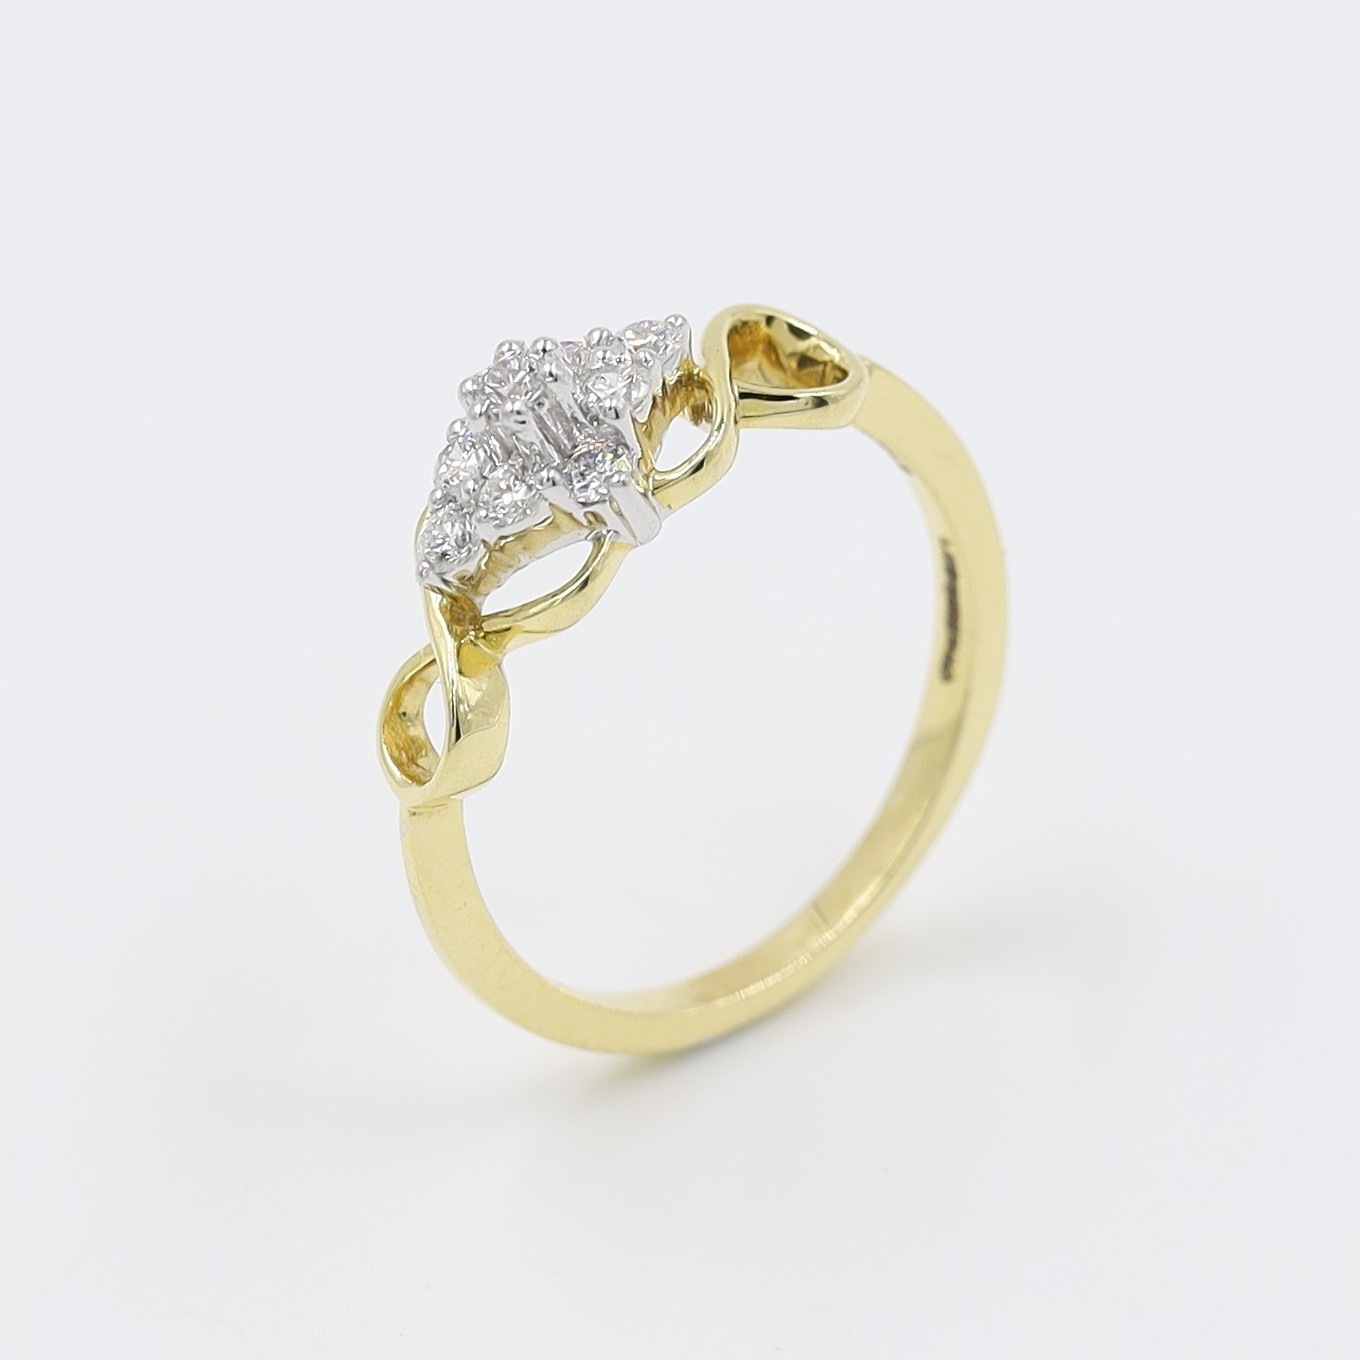 Fancy Wavy Gold And Diamond Finger Ring